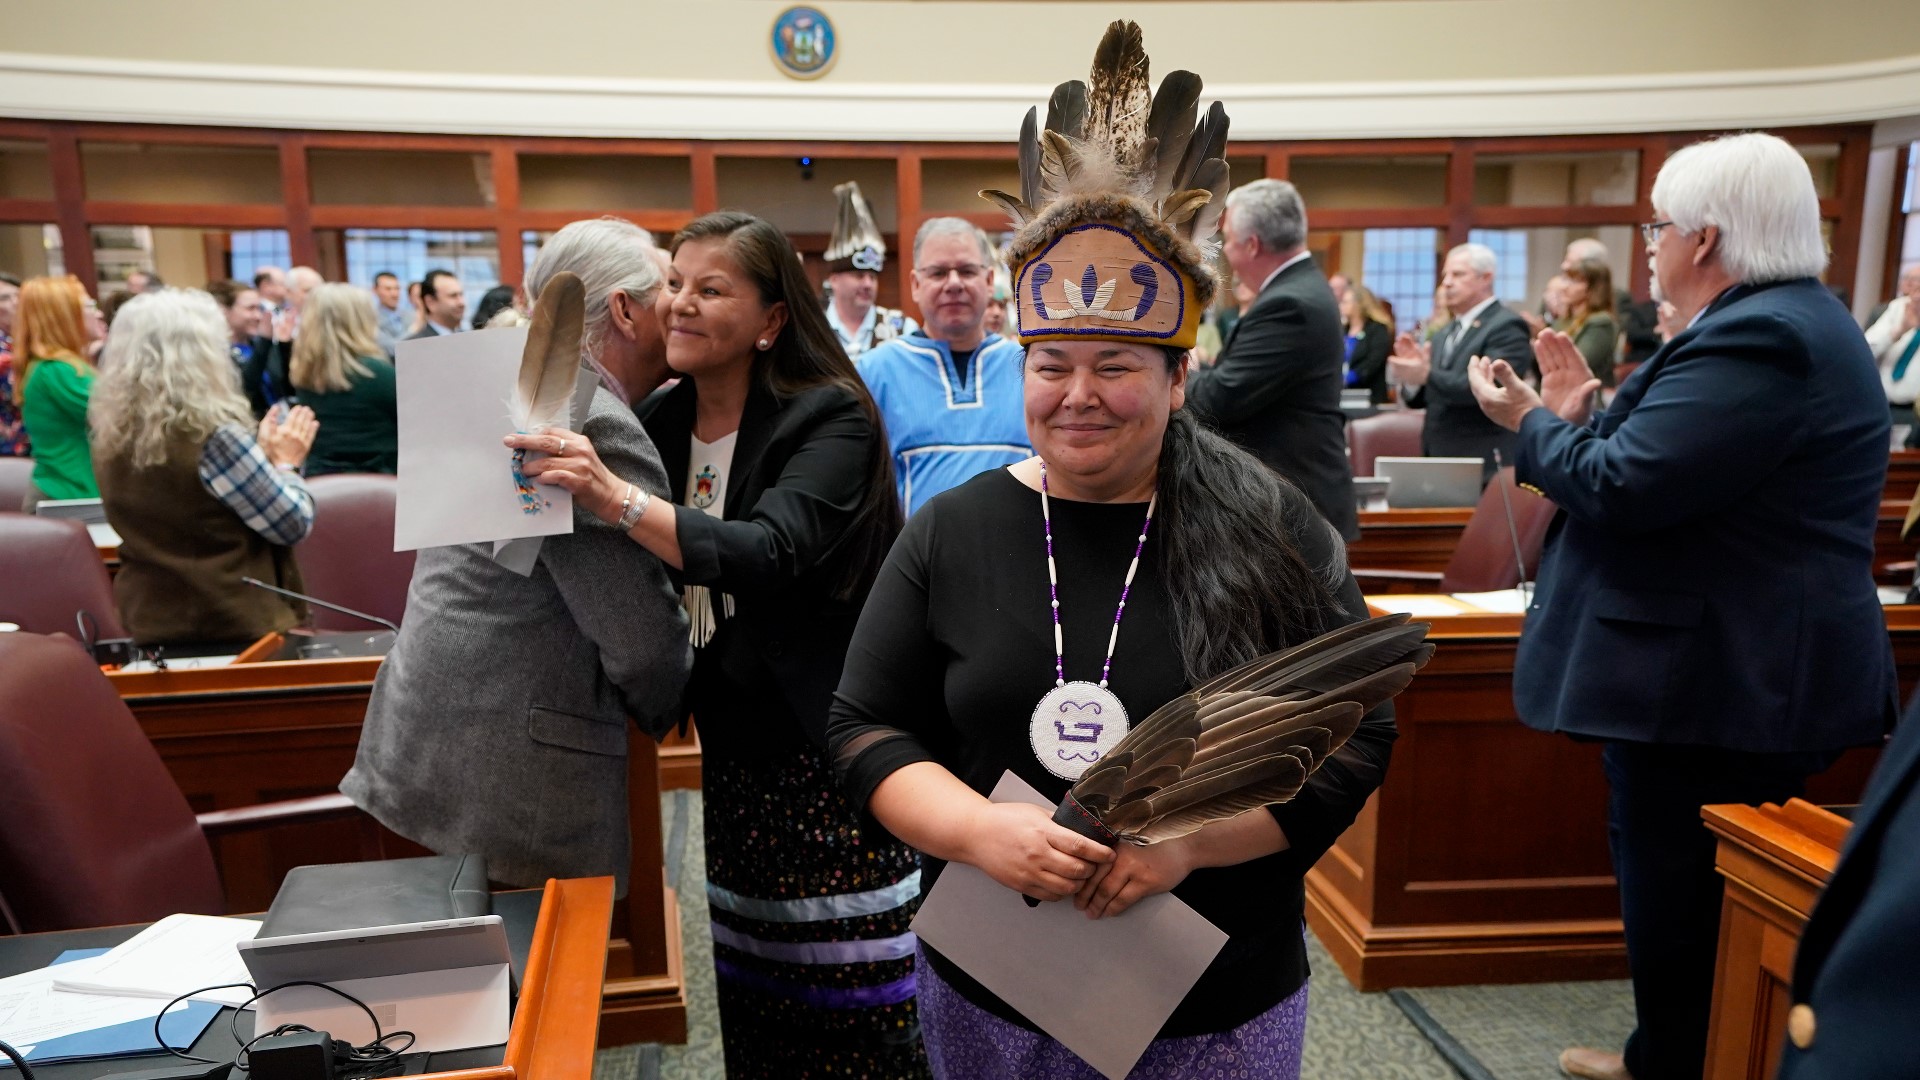 The bill would allow the Passamaquoddy, Penobscot and Maliseet and Mi’kmaq tribes in the state to benefit from more than 150 federal laws that apply to tribes.